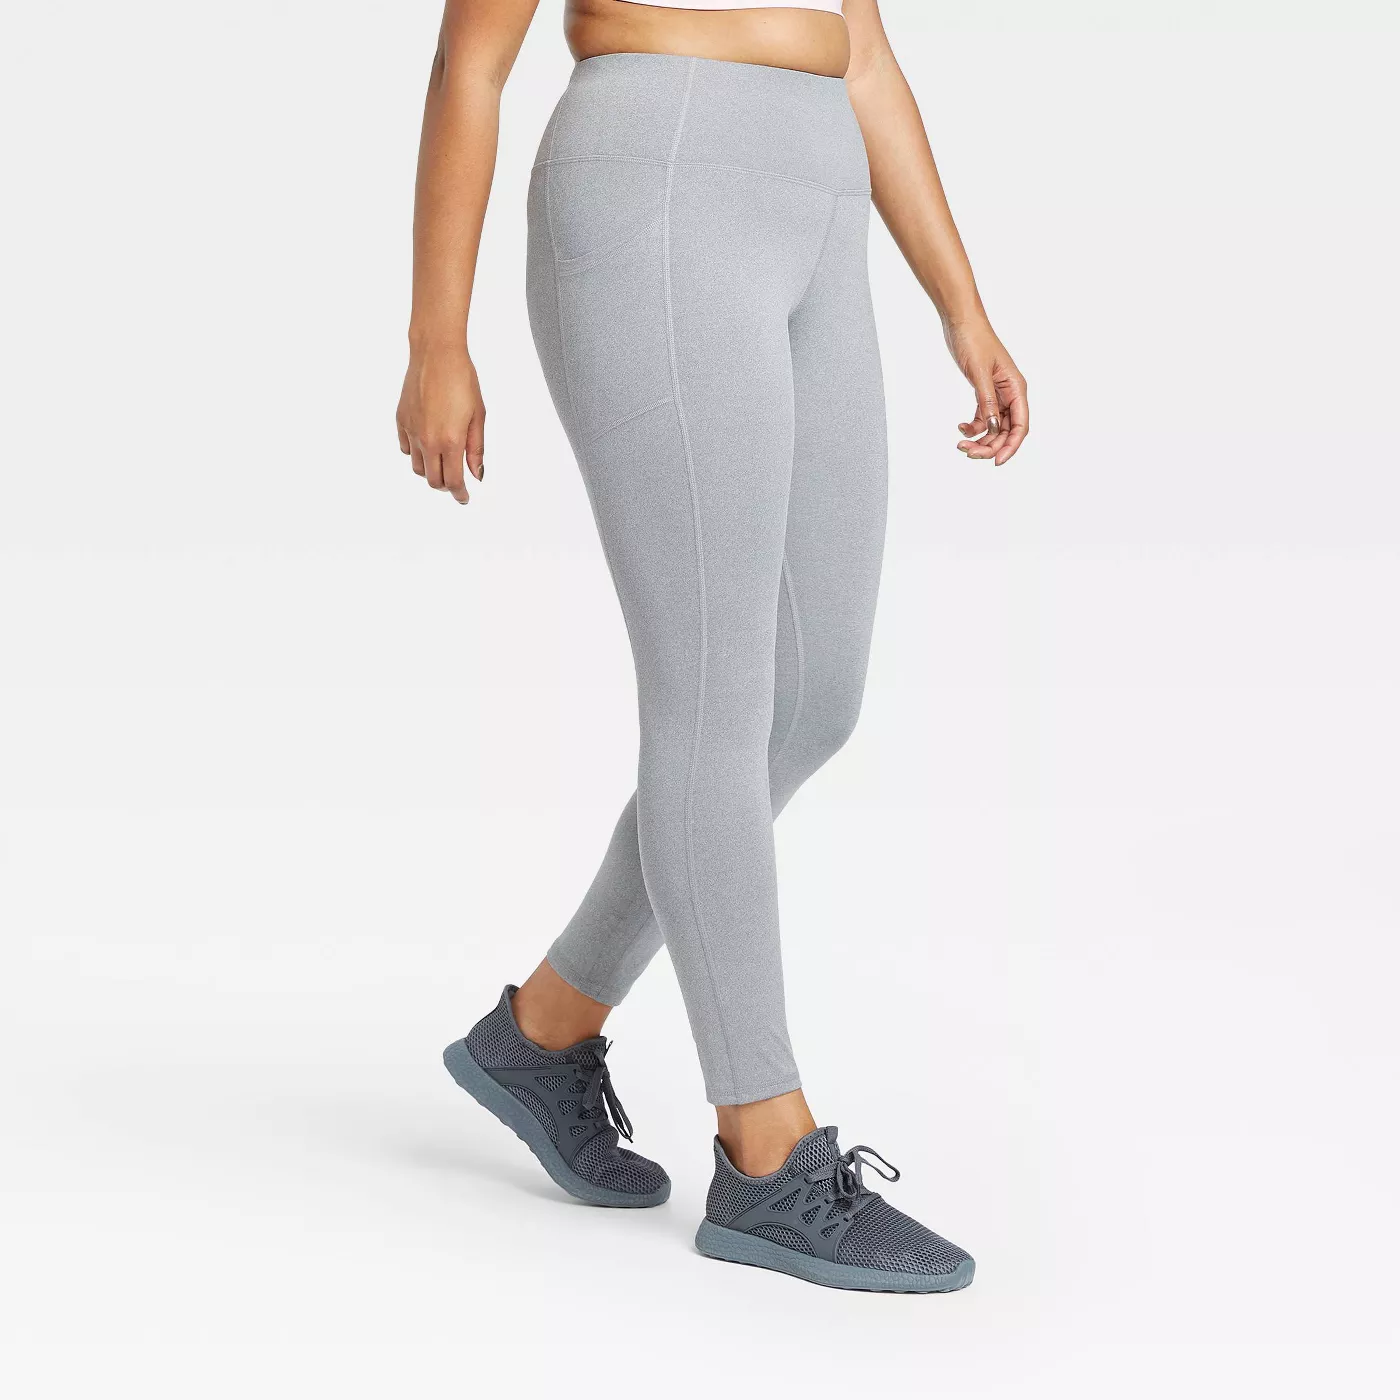 Target's New Size Inclusive Activewear Brand Launches This Month